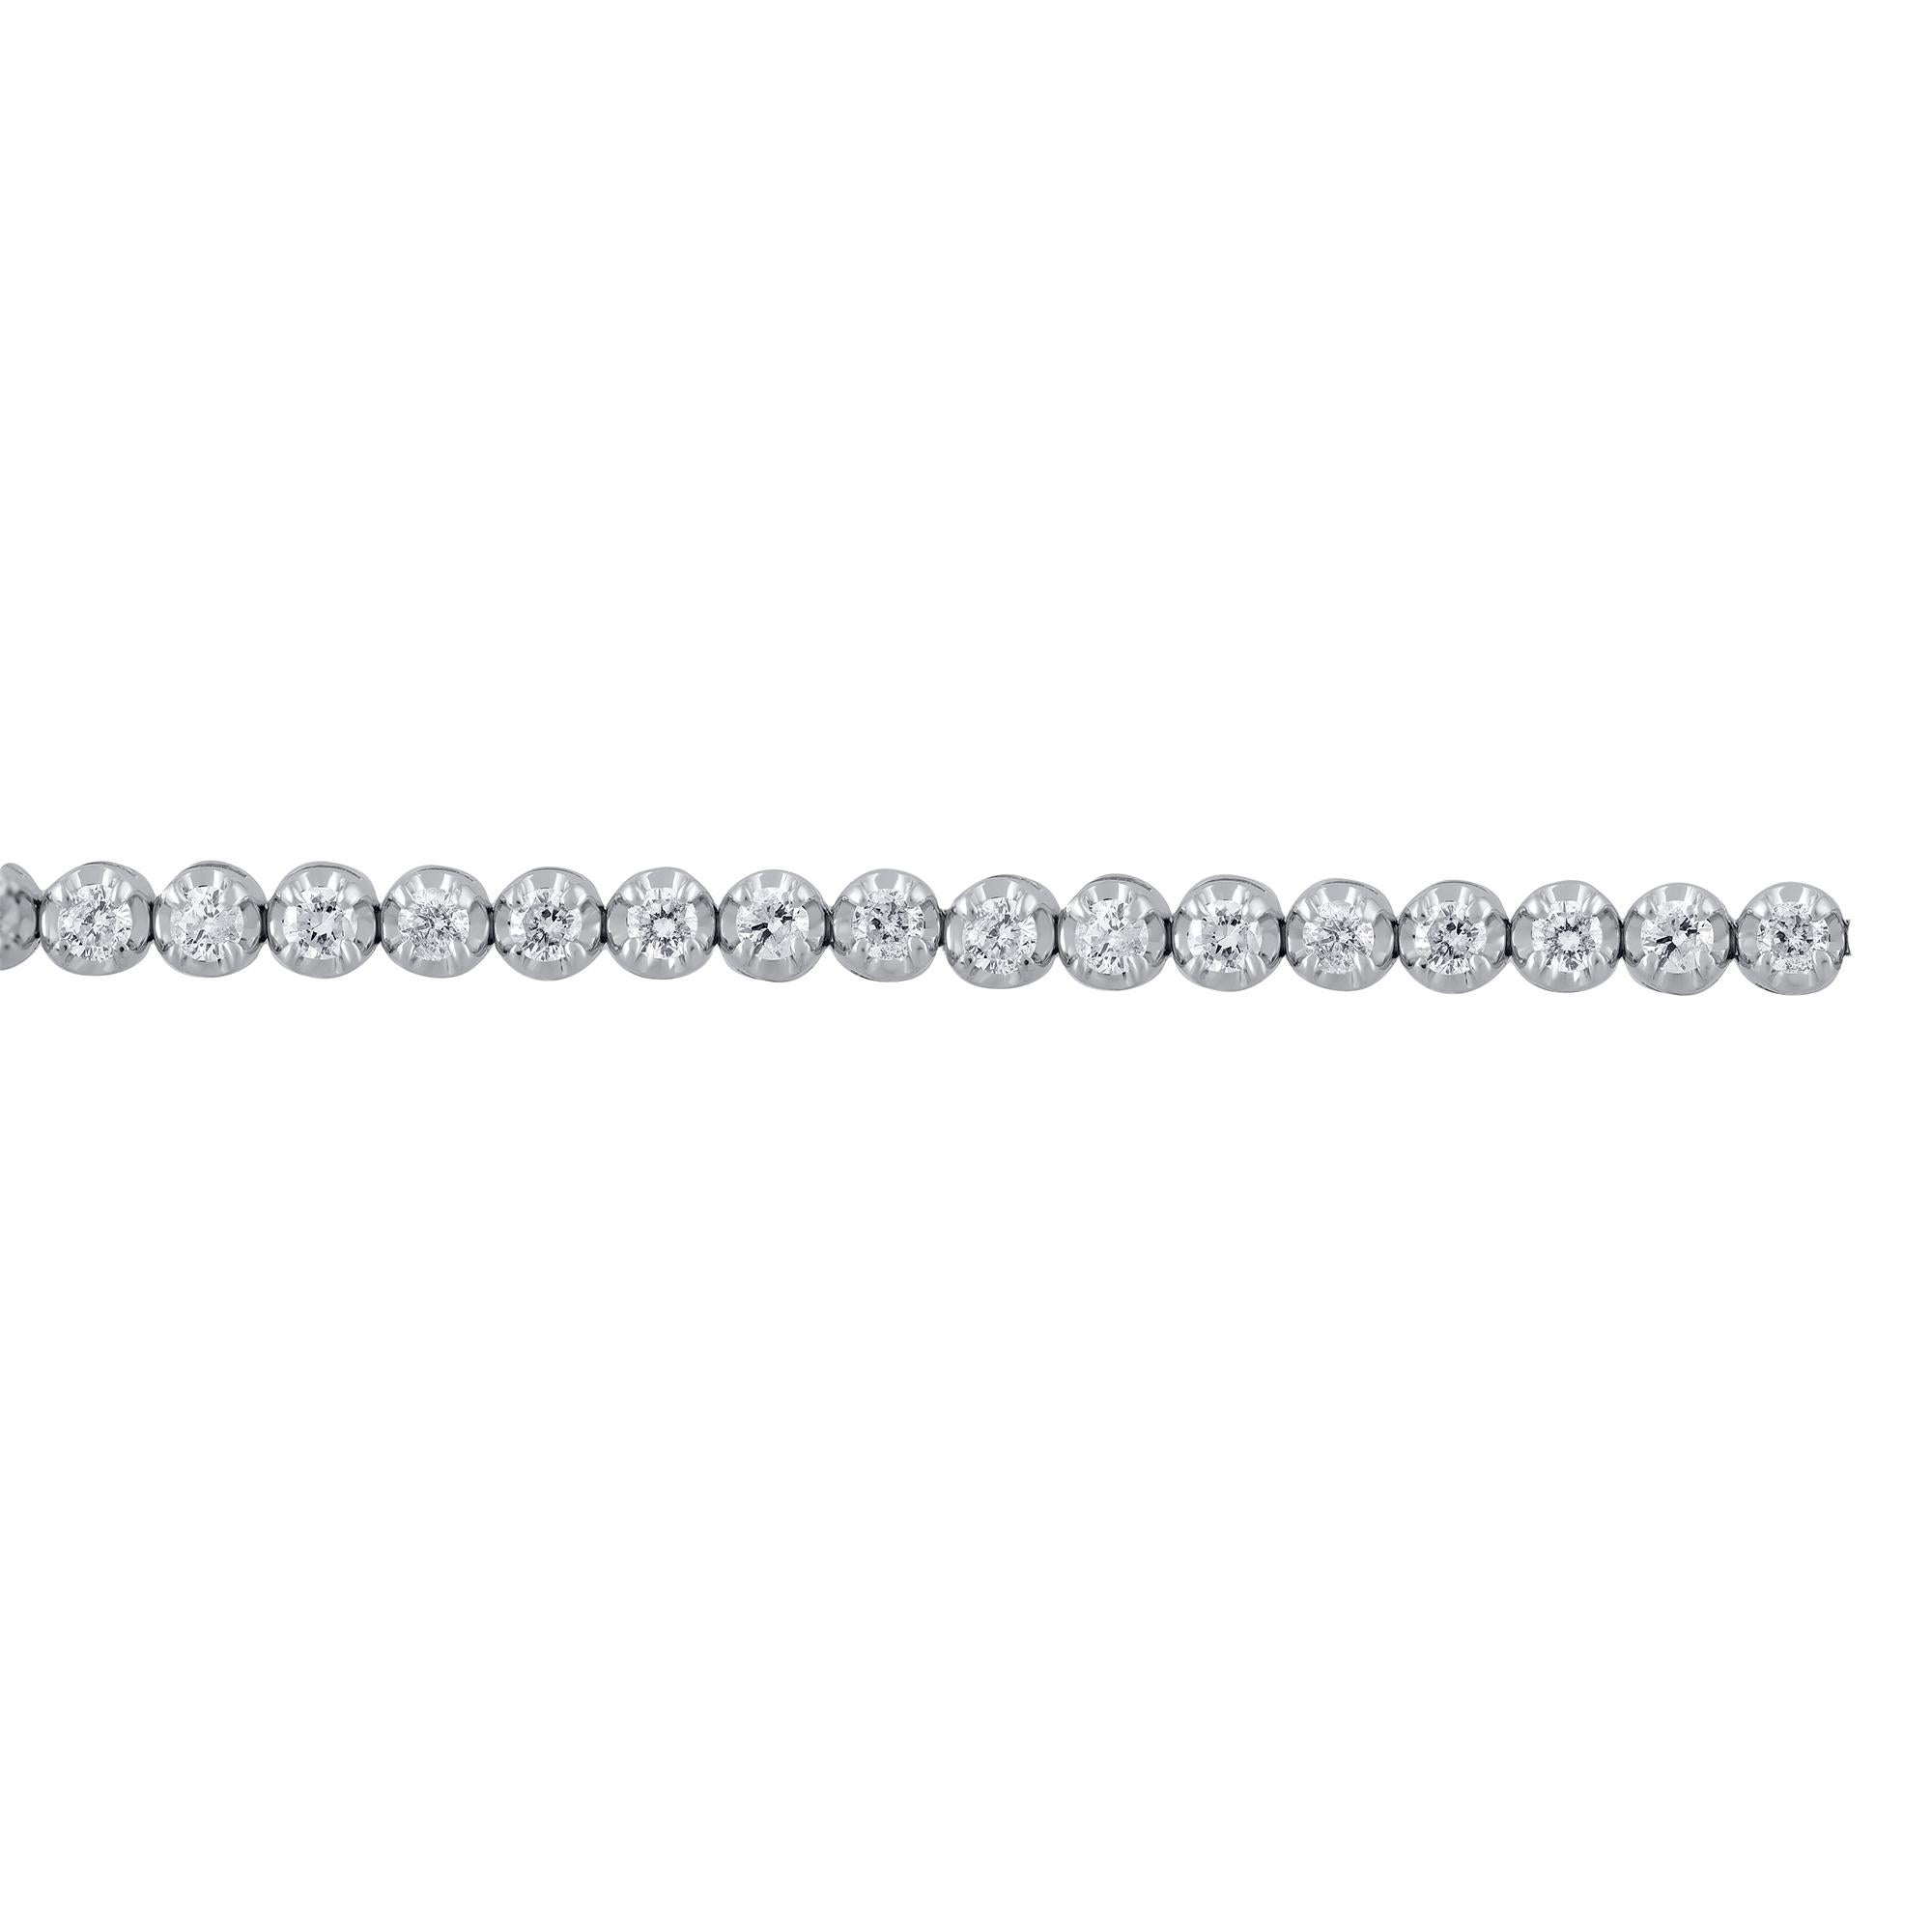 Classic Diamond Bracelet studded with 62 diamonds in prong setting. Crafted in 10K Gold, diamonds are graded J-K Color, I2-I3 Clarity. The bracelet secures firmly with a box clasp and it comes along with IGI certificate.  
